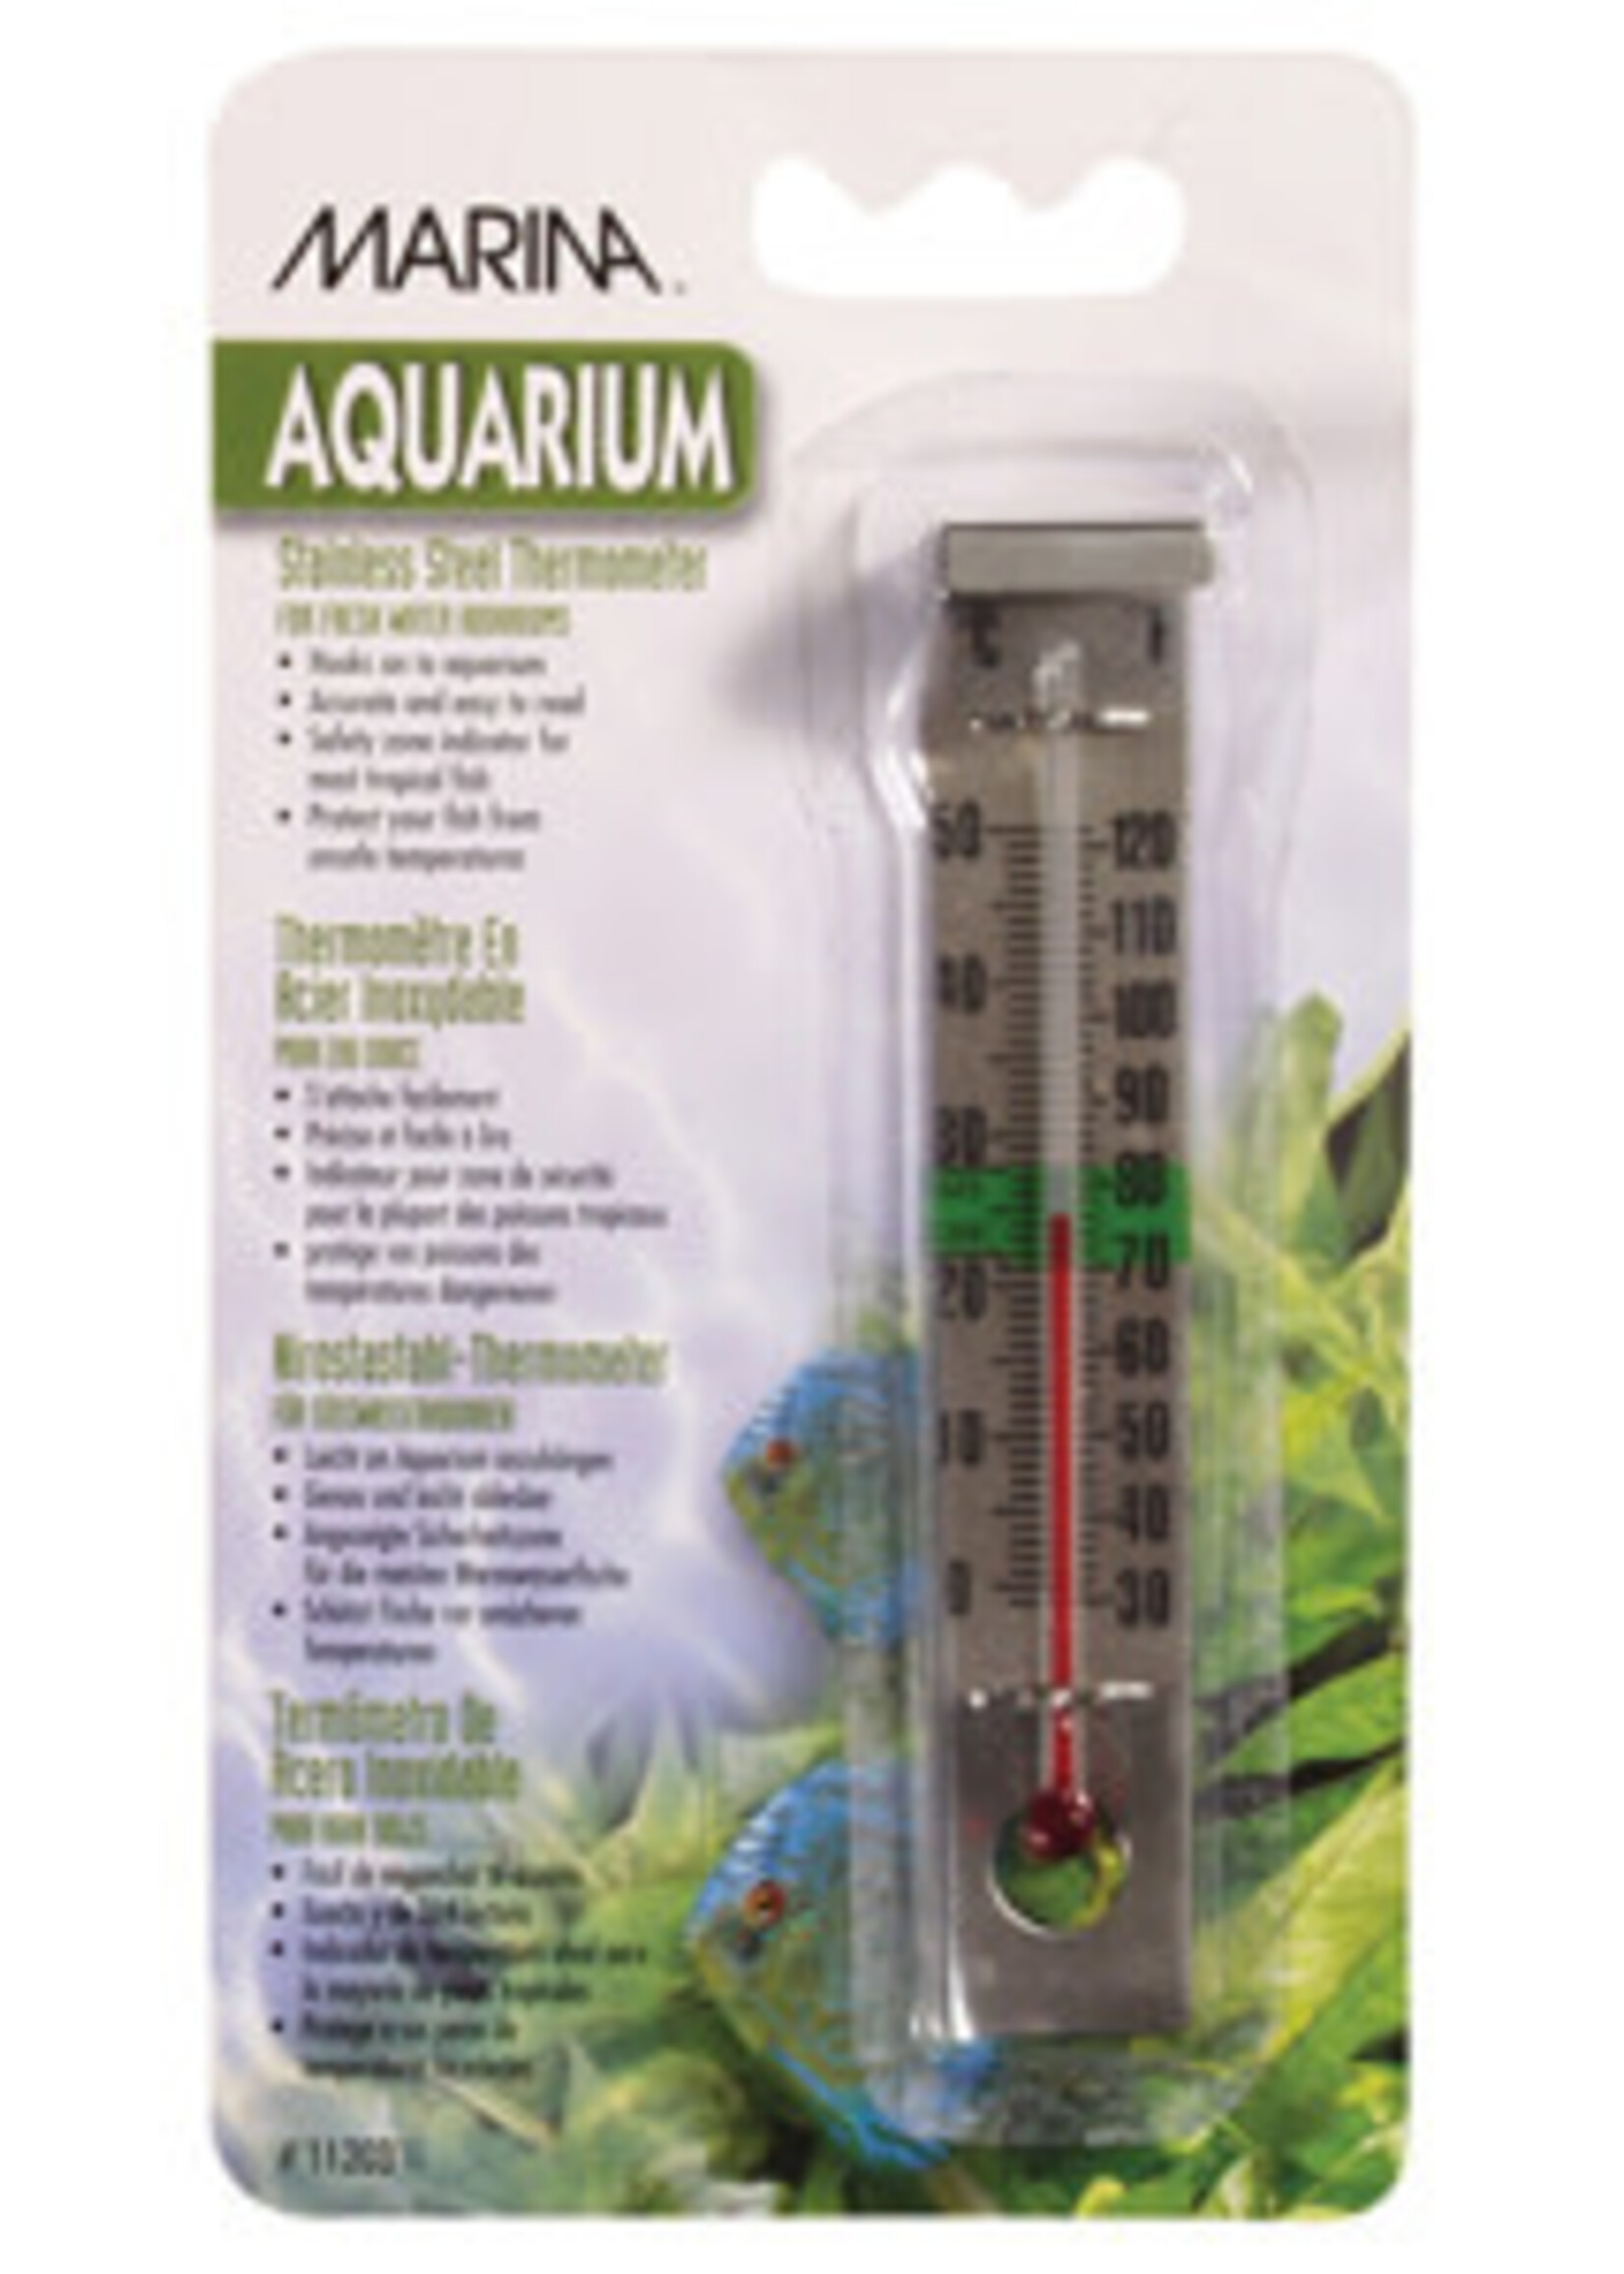 Marina Stainless Steel Thermometer